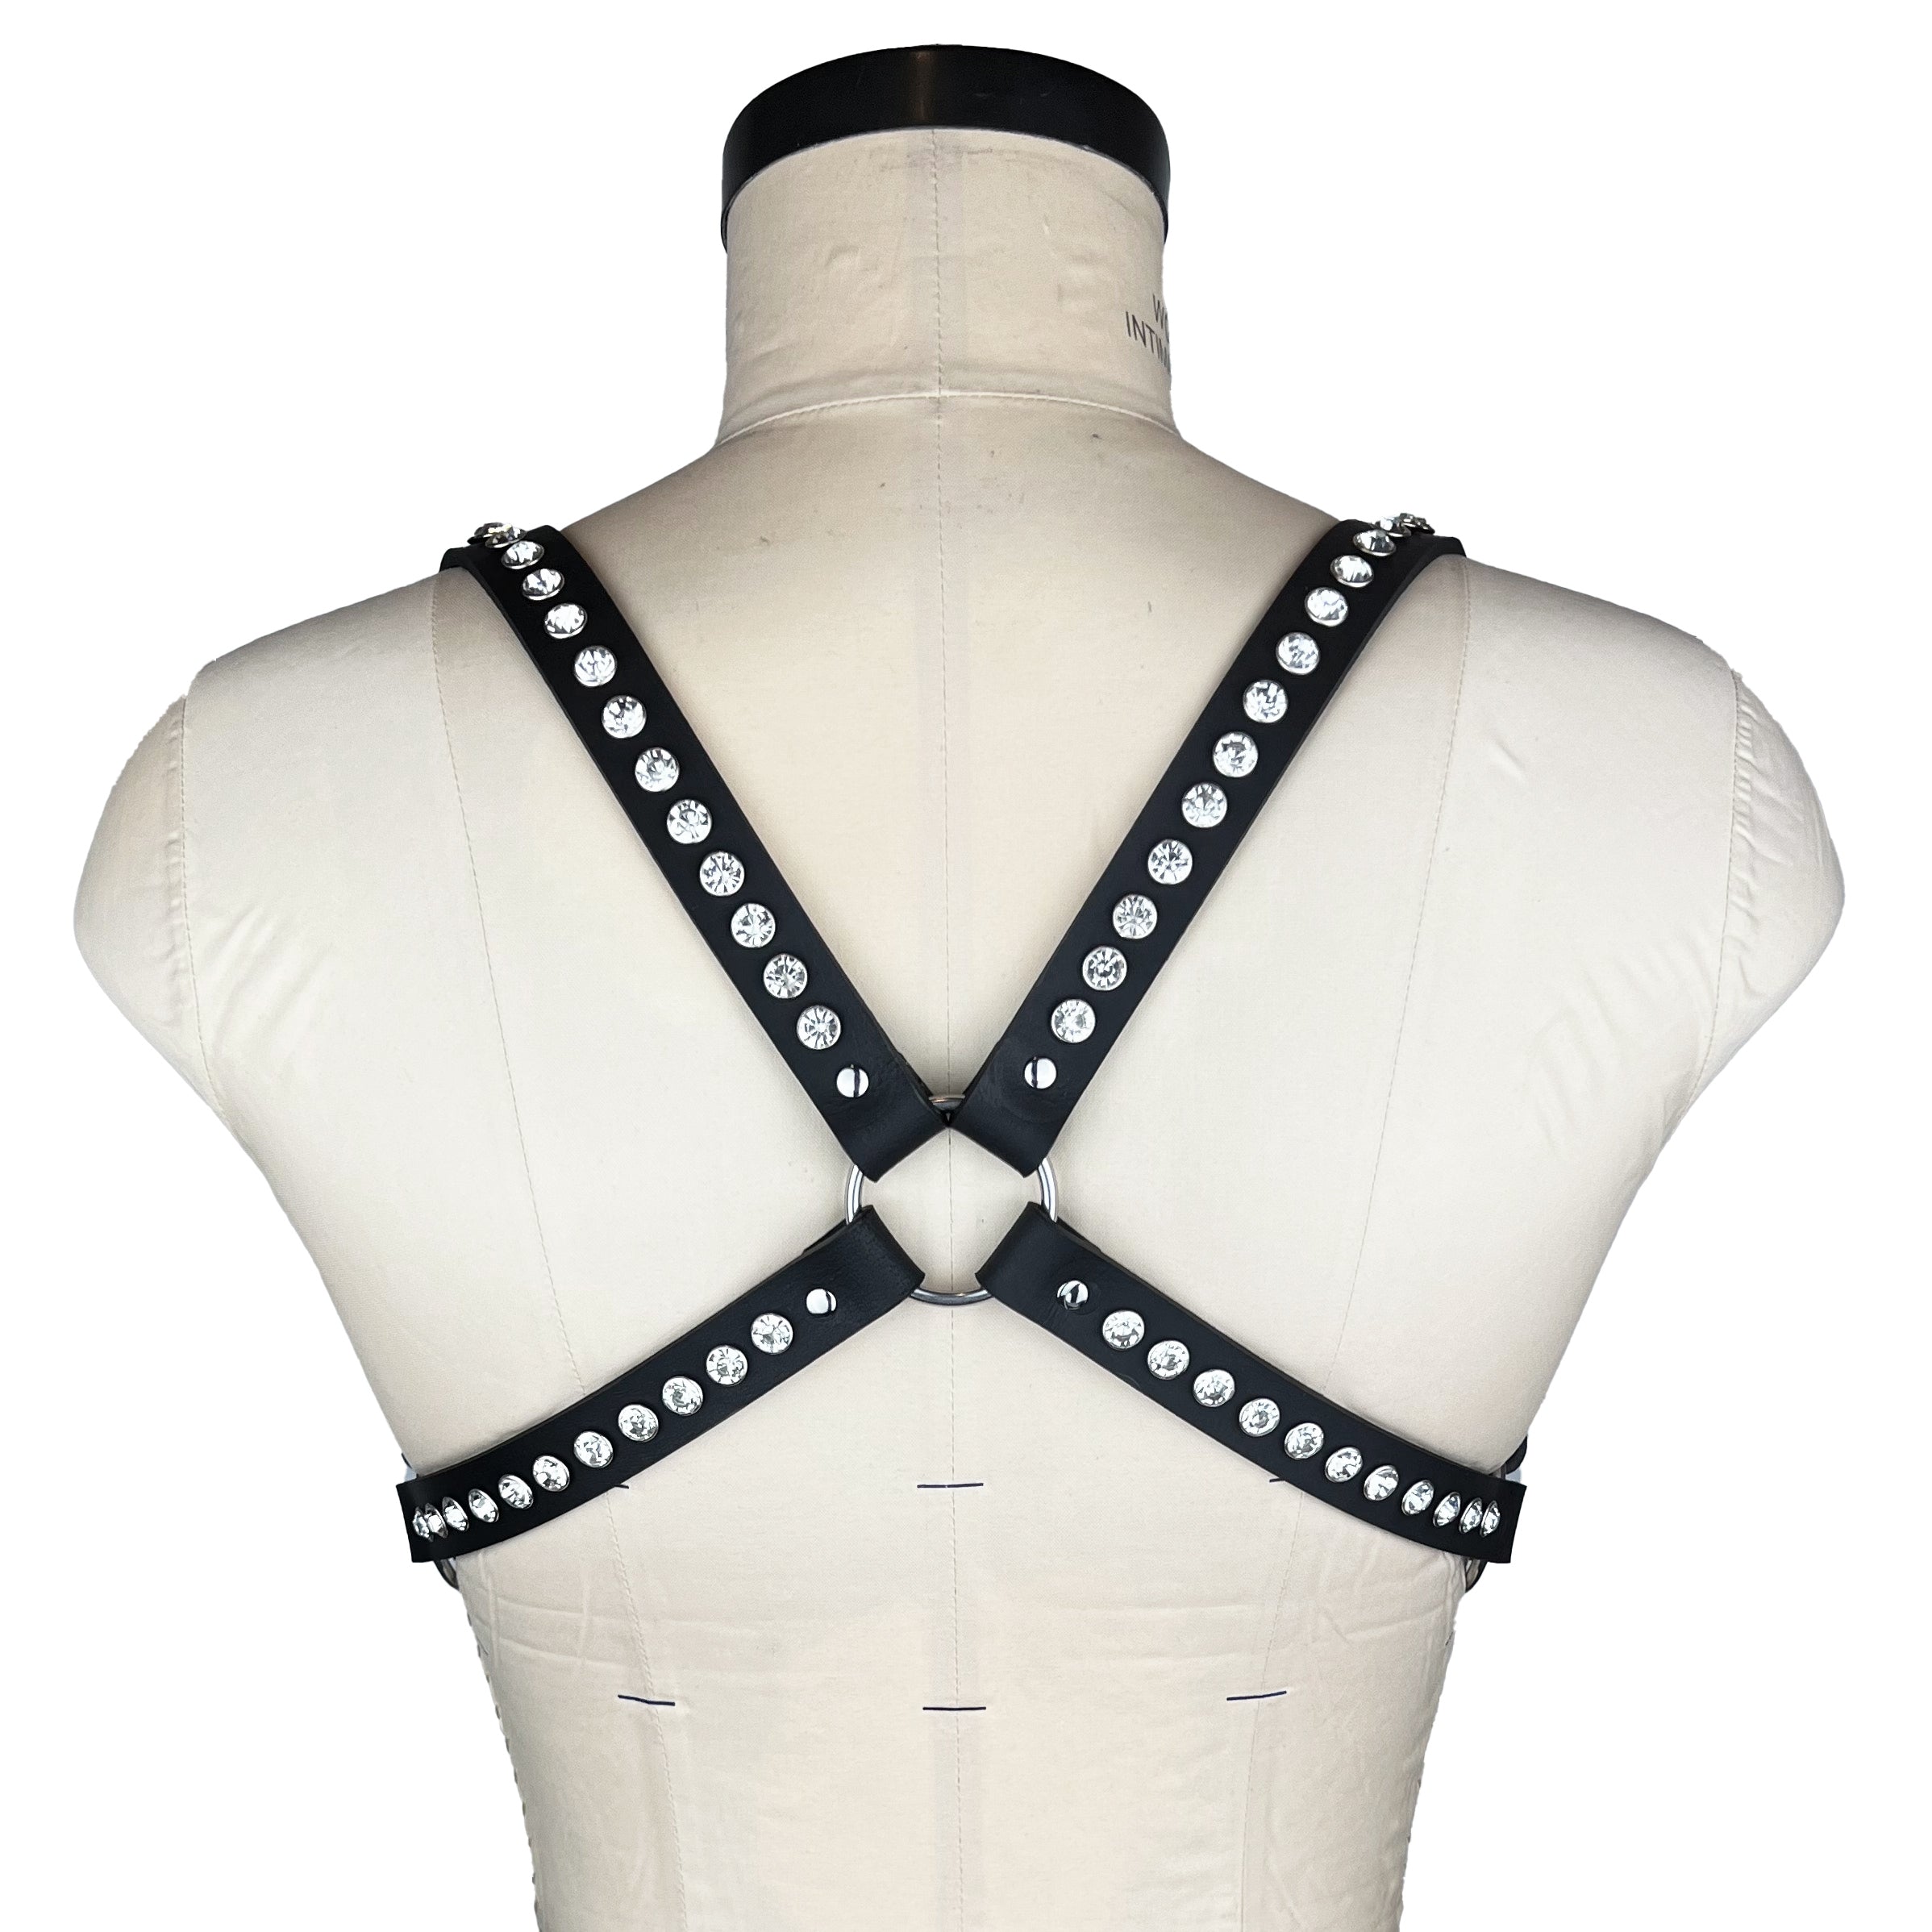 luxury Italian leather and crystal fashion and fetish women's men's gemma harness, bespoke, made-to-order in nyc, back view